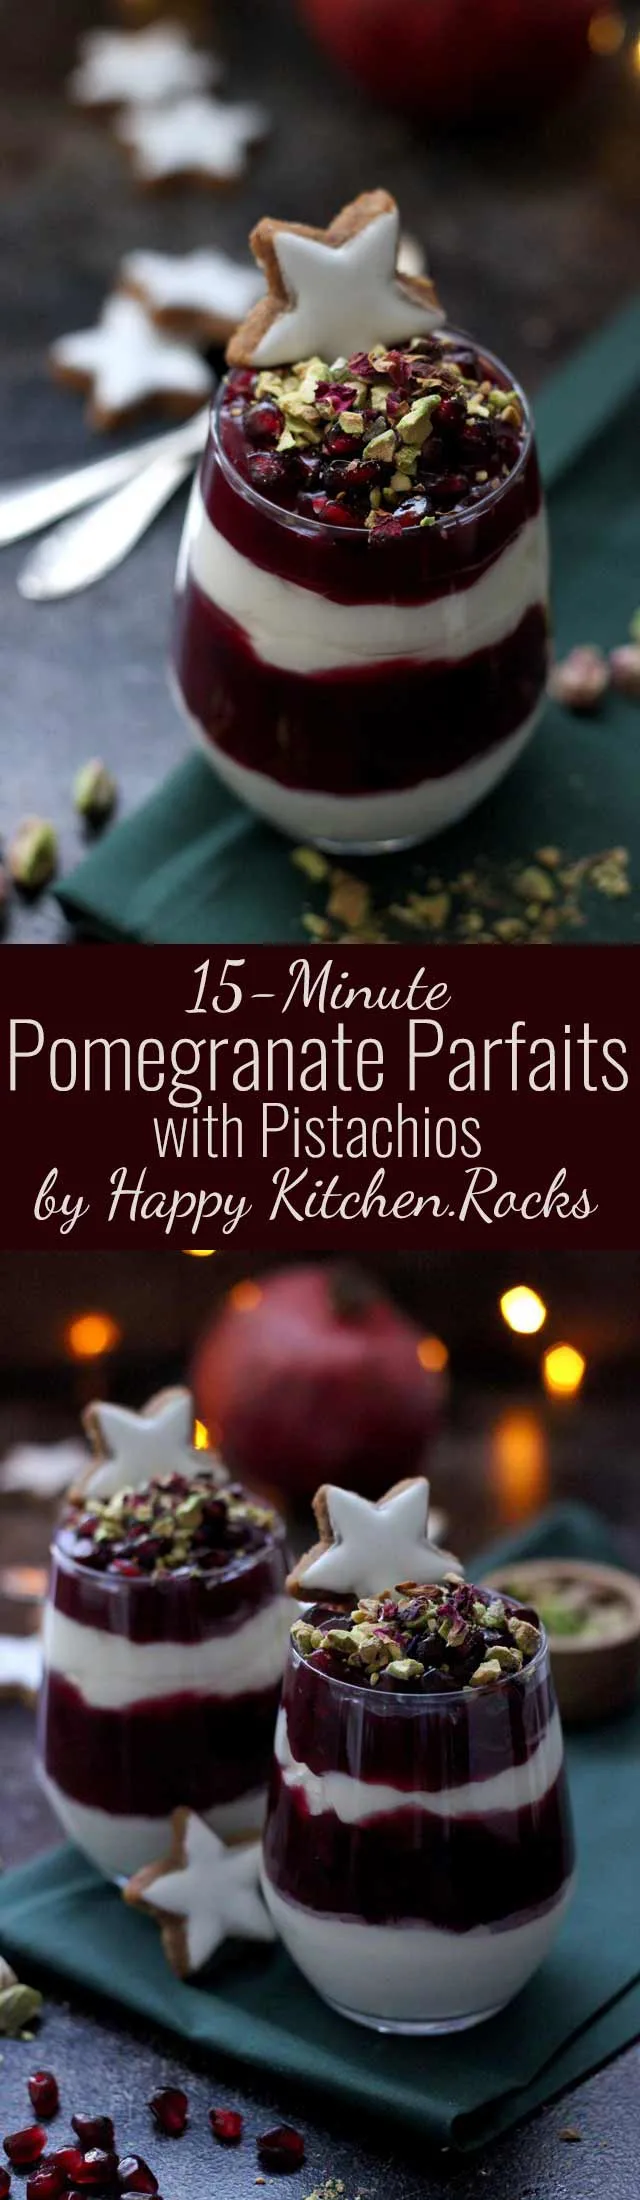 15-Minute Pomegranate Parfaits with Pistachios - Super Long Collage of Two Images with Text Overlay